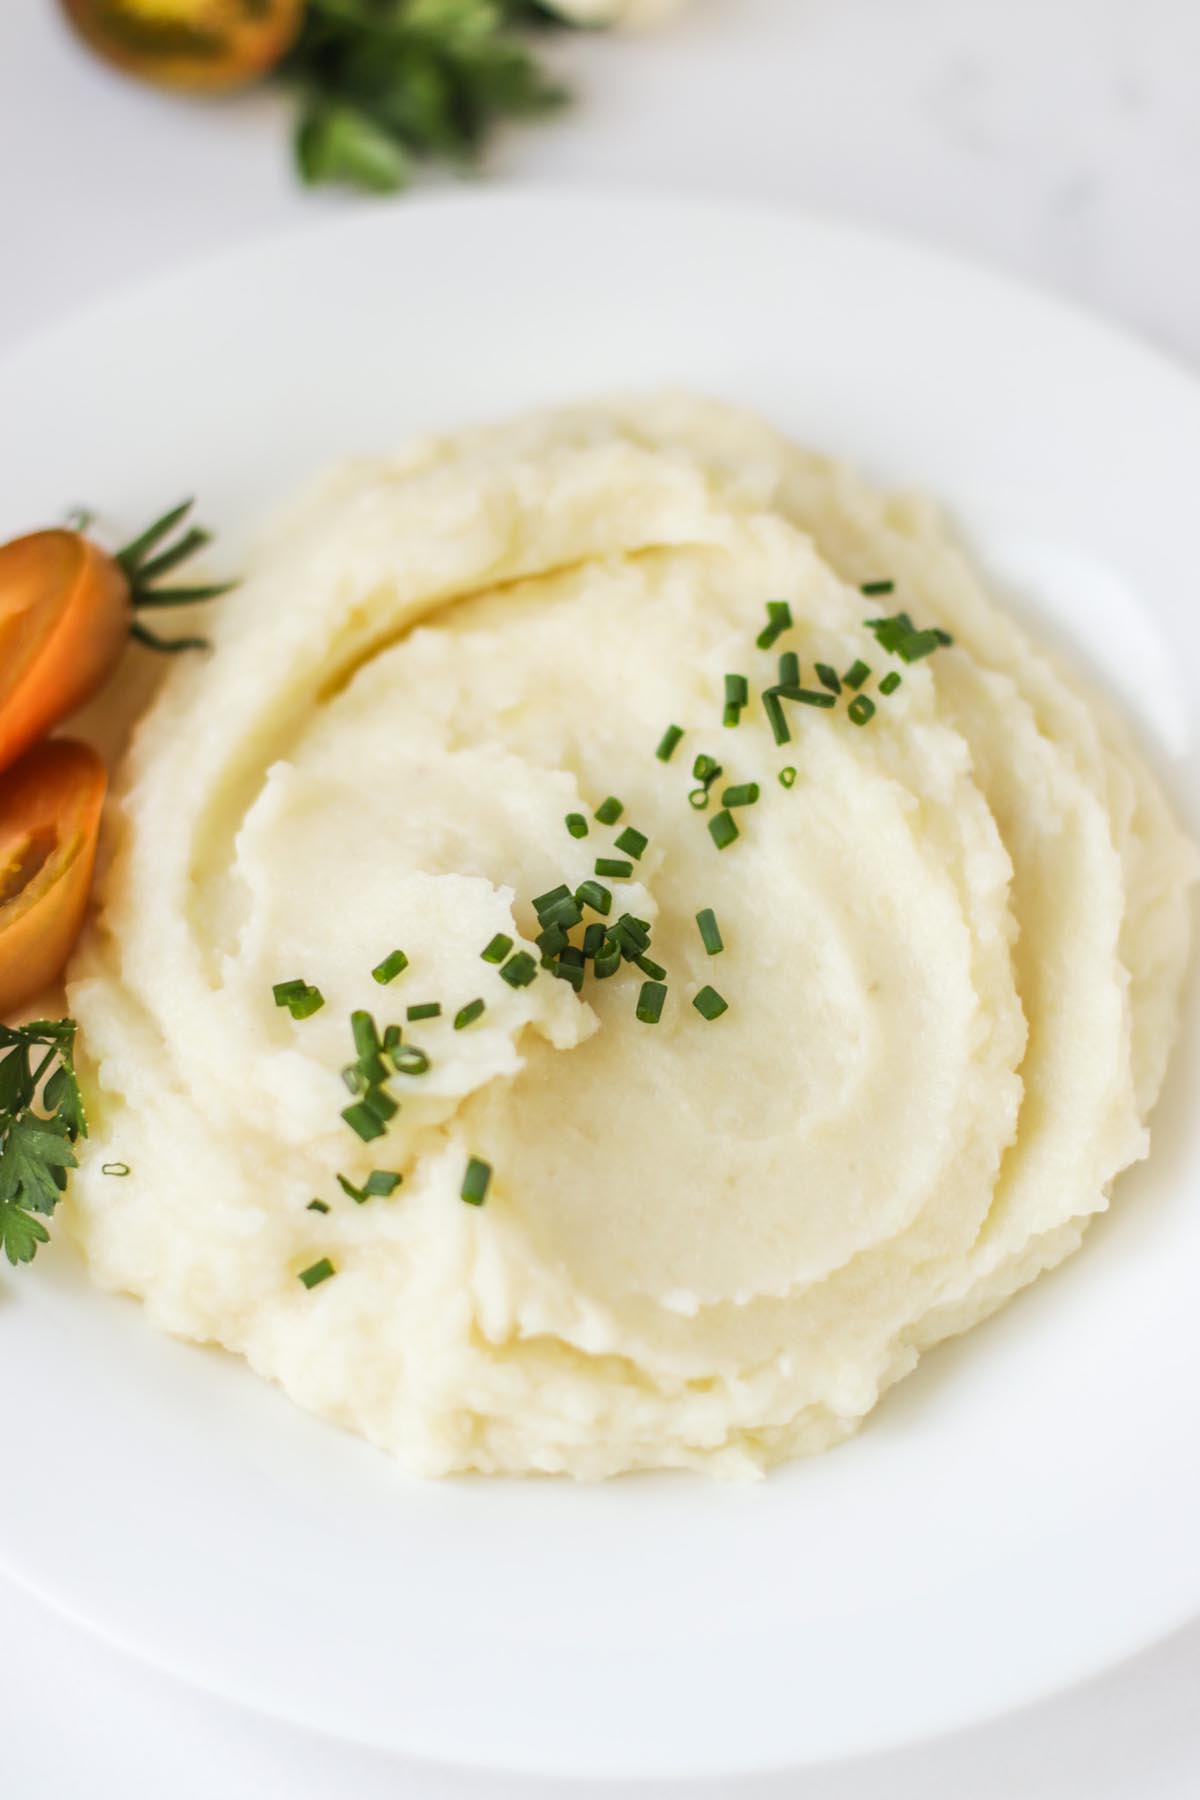 Mashed potatoes garnished with green herbs.